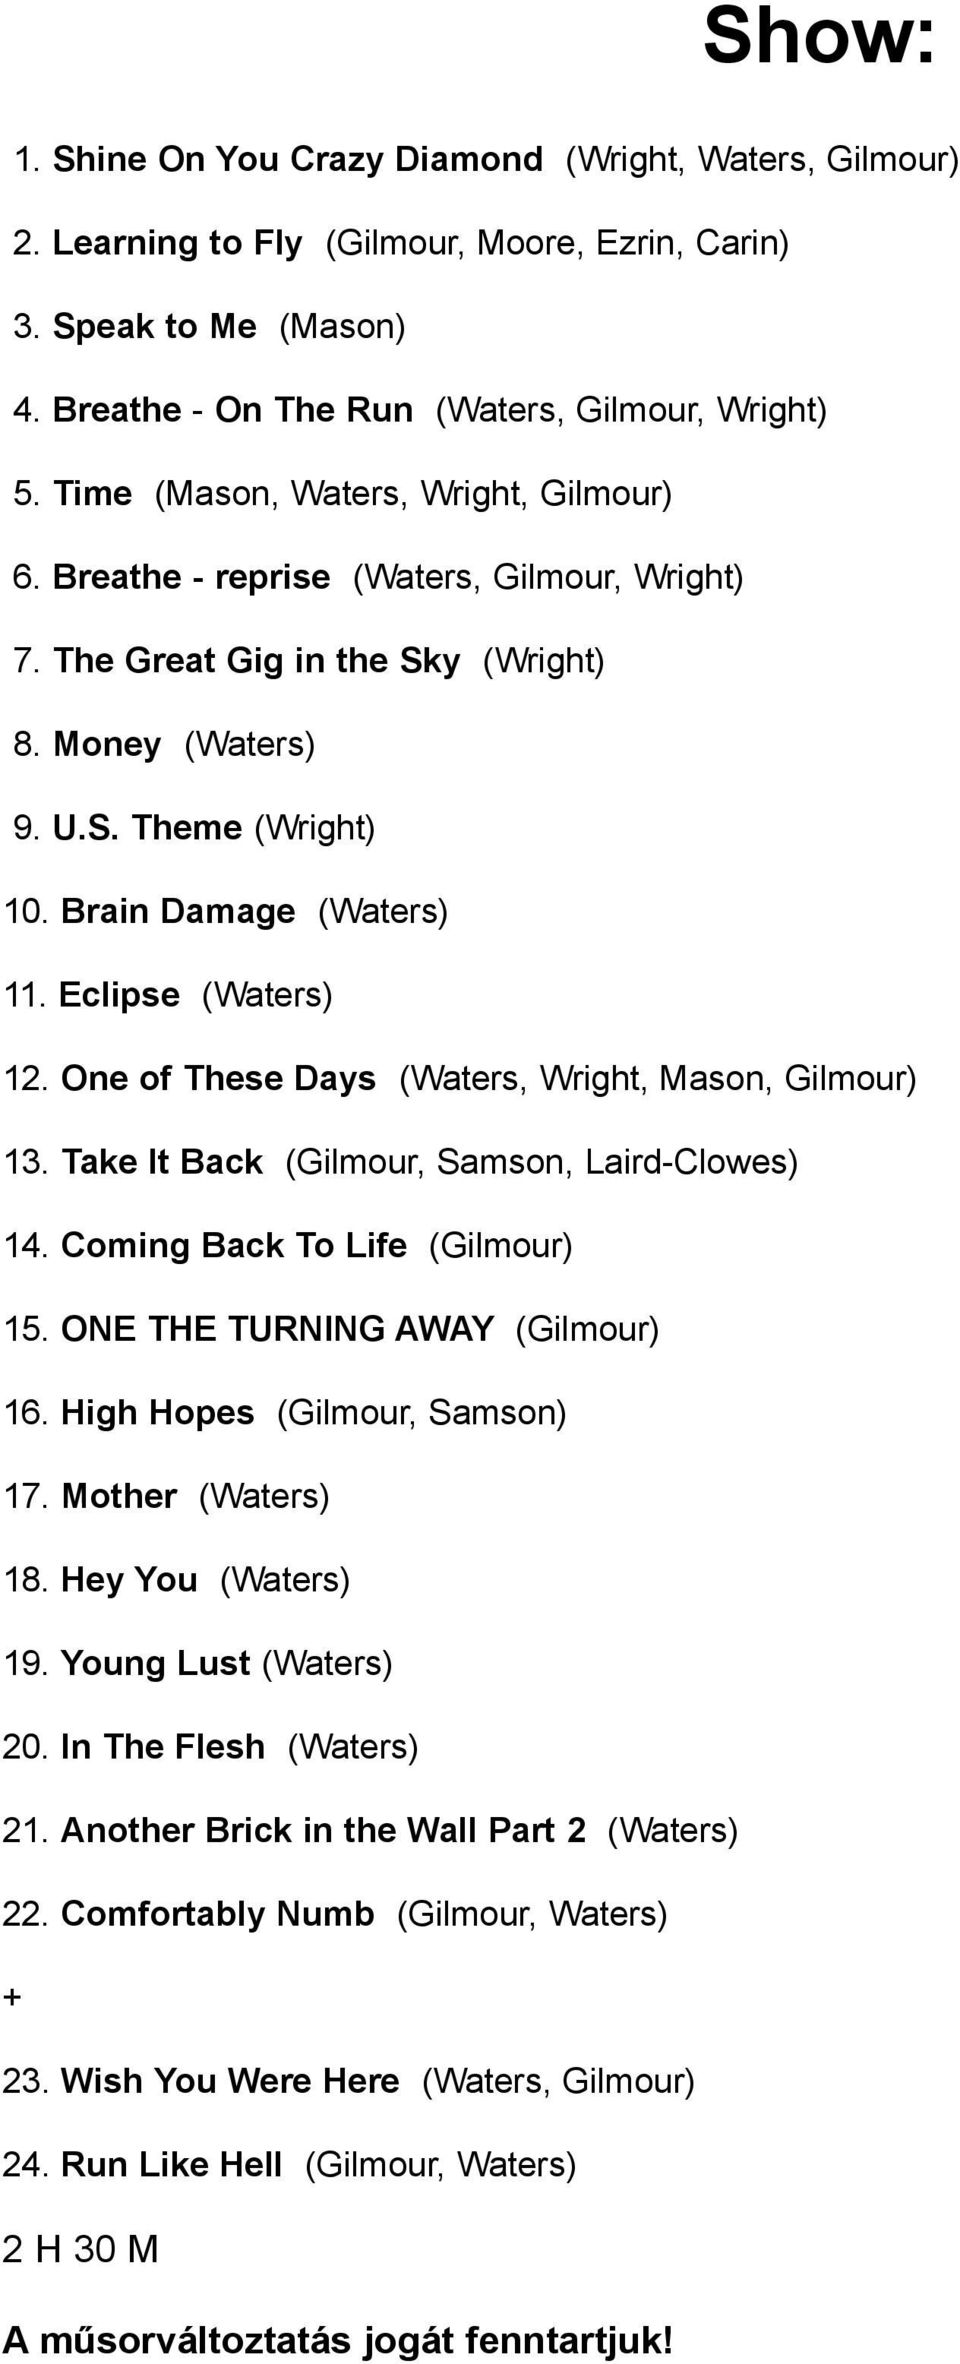 Eclipse (Waters) 12. One of These Days (Waters, Wright, Mason, Gilmour) 13. Take It Back (Gilmour, Samson, Laird-Clowes) 14. Coming Back To Life (Gilmour) 15. ONE THE TURNING AWAY (Gilmour) 16.